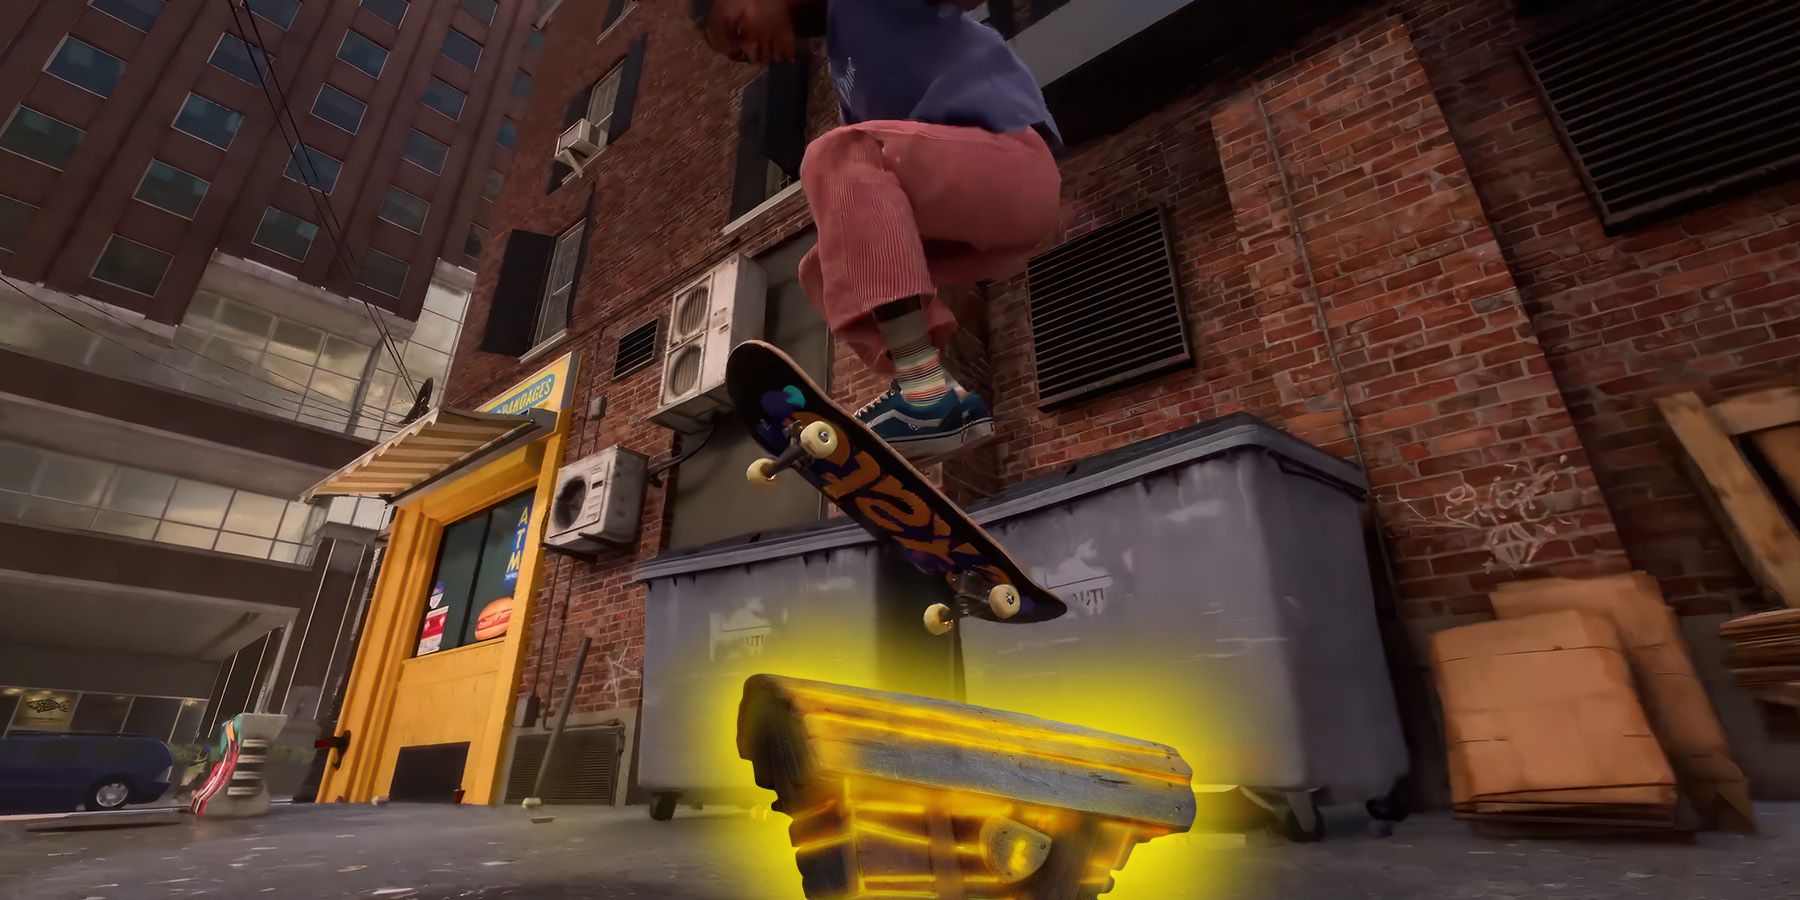 ollie over the loot box skate